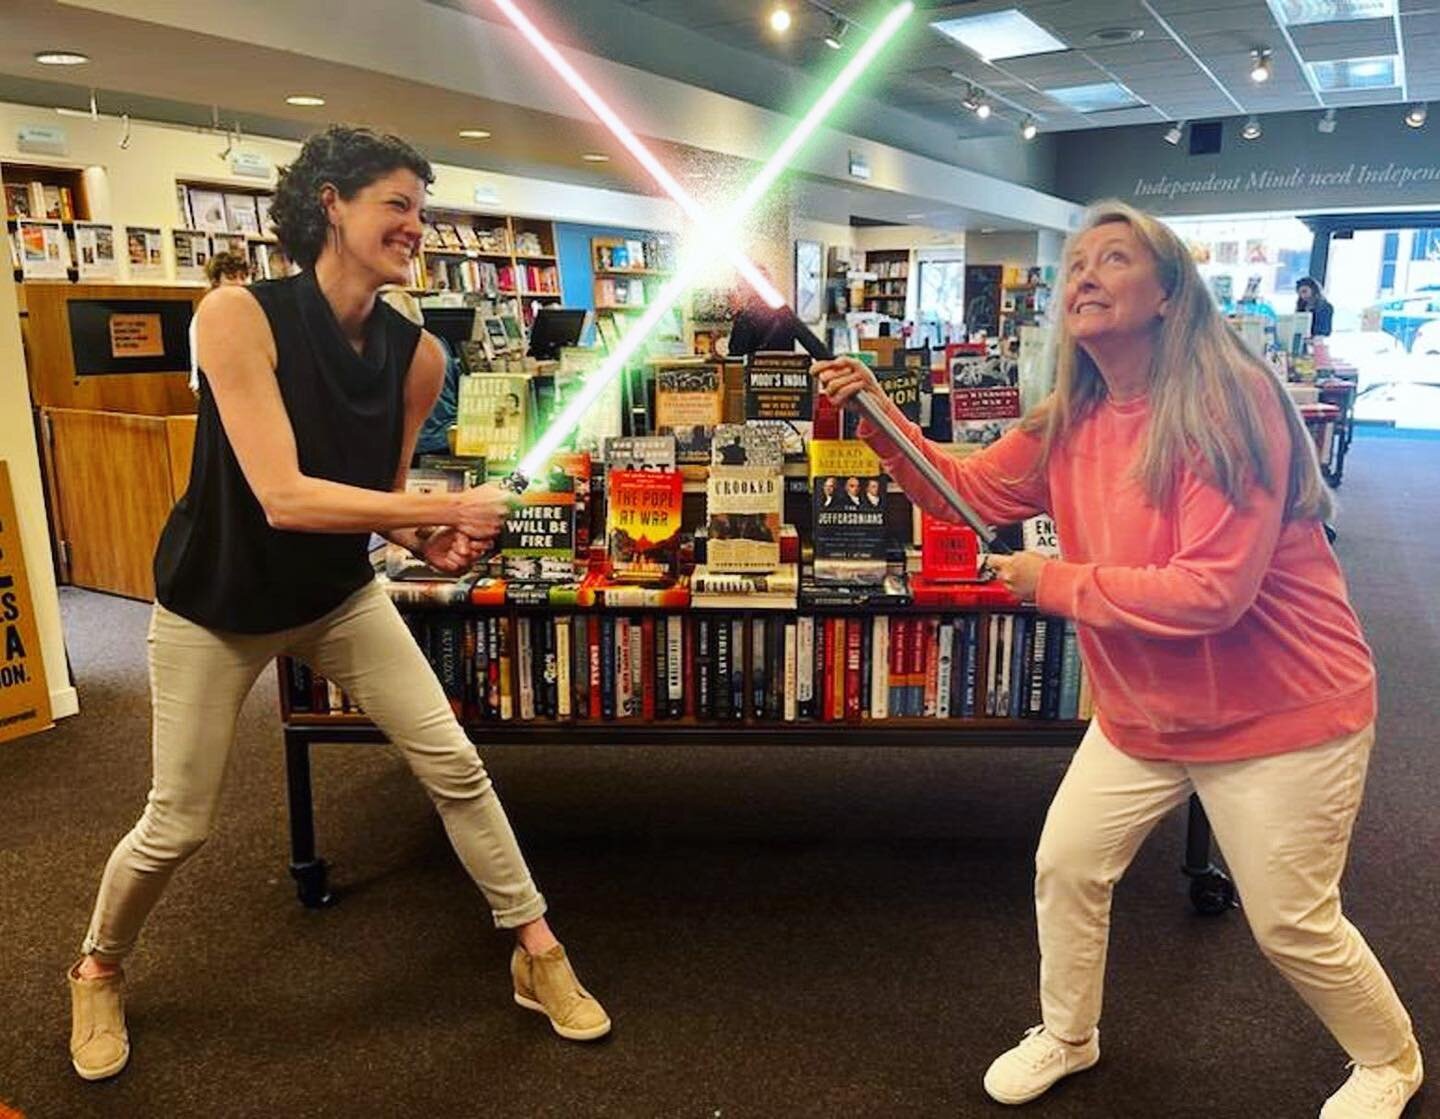 Nothing like a little light saber action with children&rsquo;s book buyer Stacey Hearr to celebrate May the Fourth after signing copies of MAKING MORE. Thank you to all the folks at @warwicksbooks for indulging my shenanigans, and especially to @paol